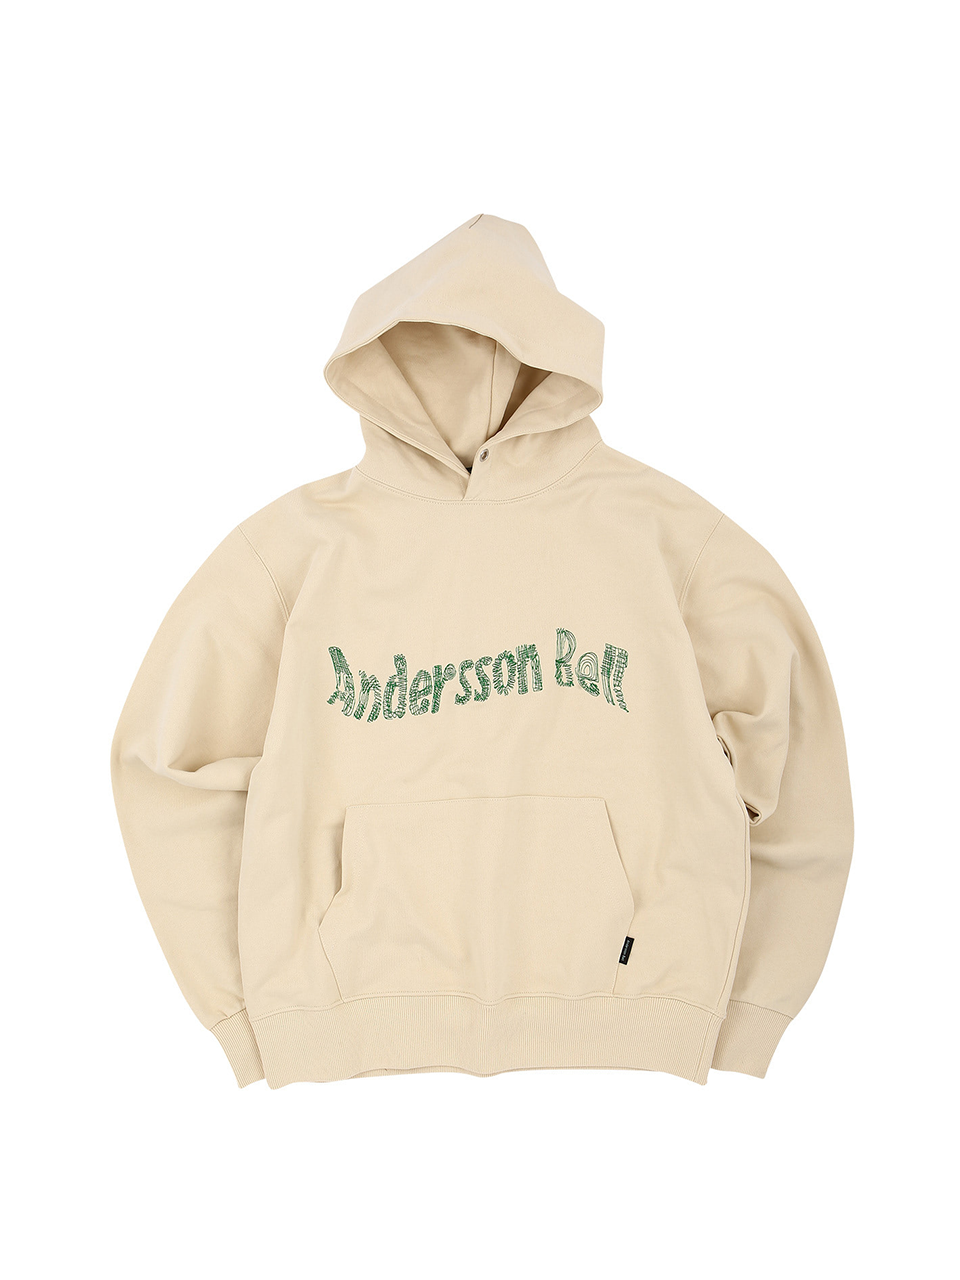 ANDERSSON BELL - UNISEX NEW AB LOGO EMBROIDERY HOODIE (IVORY)